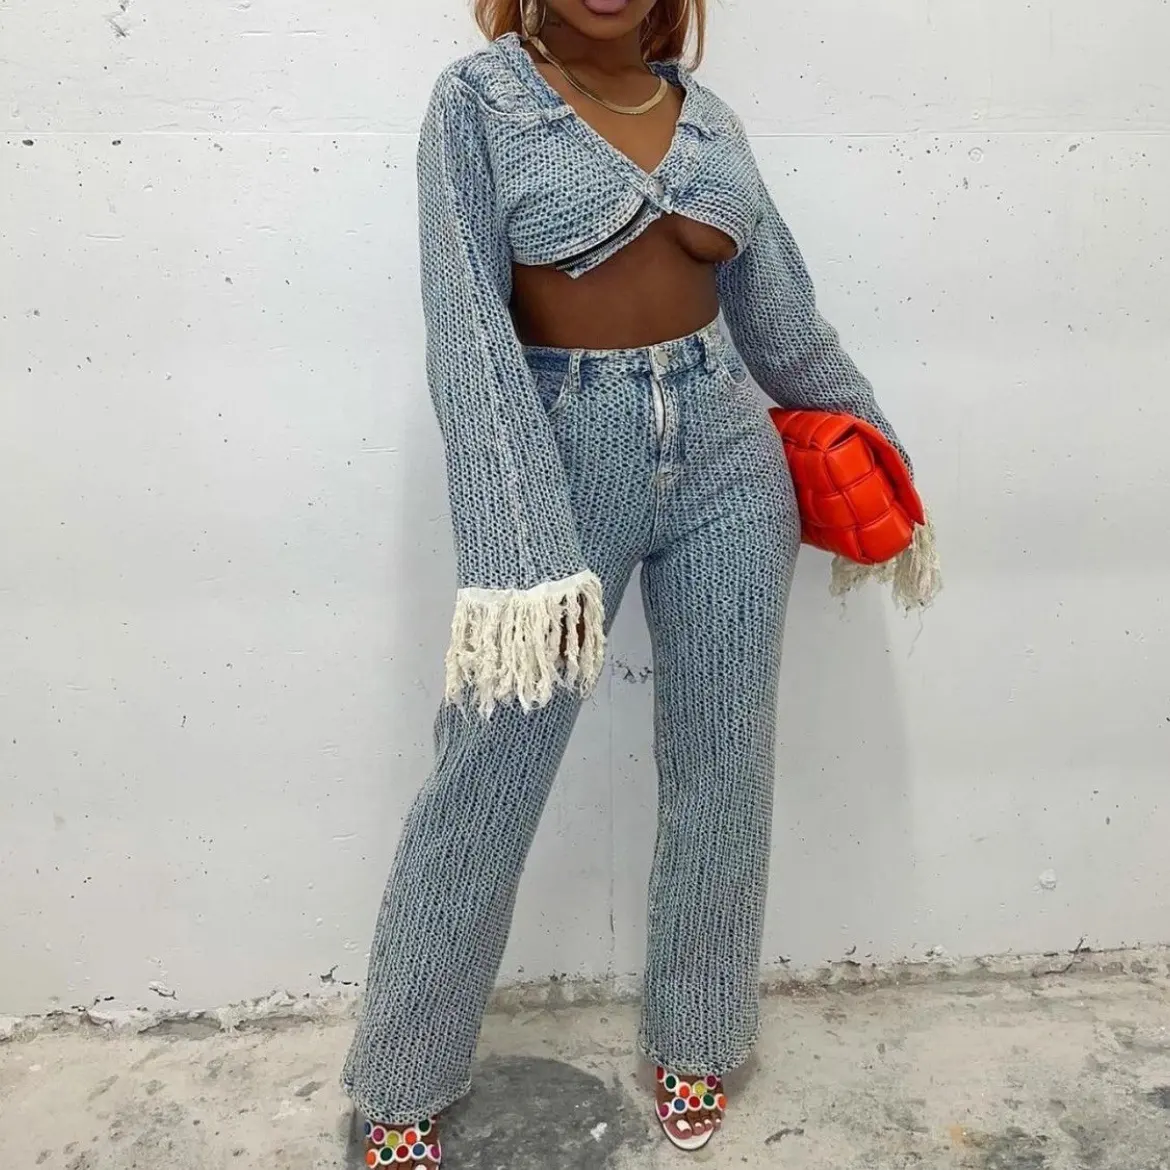 New Fashion Streetwear Matching Sets 2 Two Piece Outfits Pant Set Fall 2021 Women Clothes Women Two Piece Sets